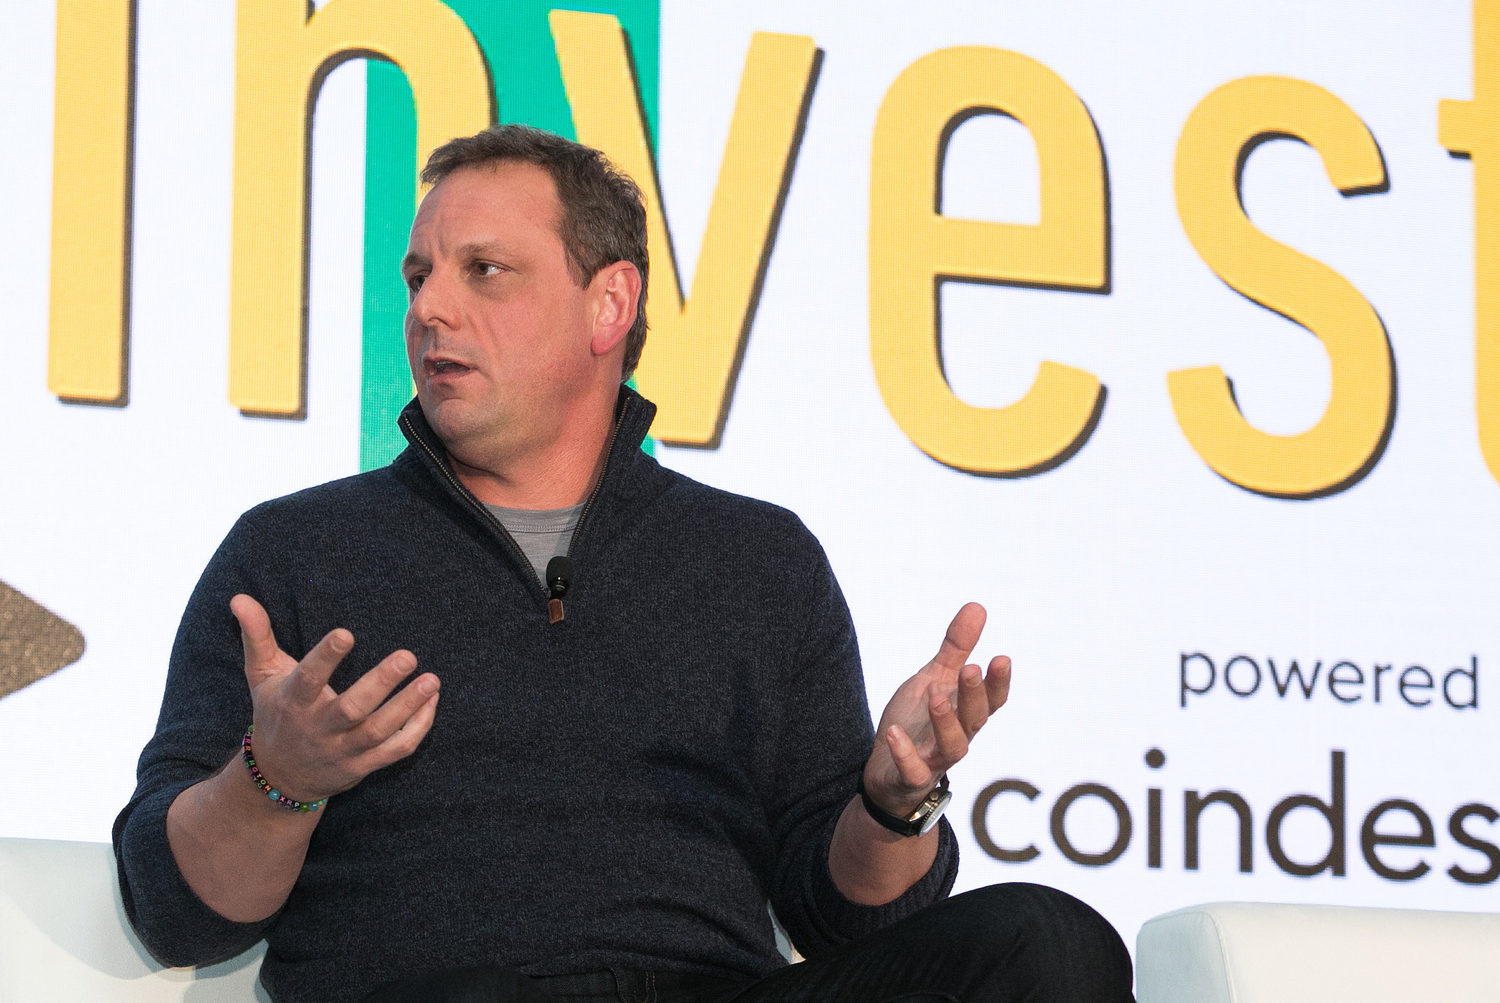 TechCrunch Founder’s Crypto Fund Tops $100 Million, Completes First Acquisition